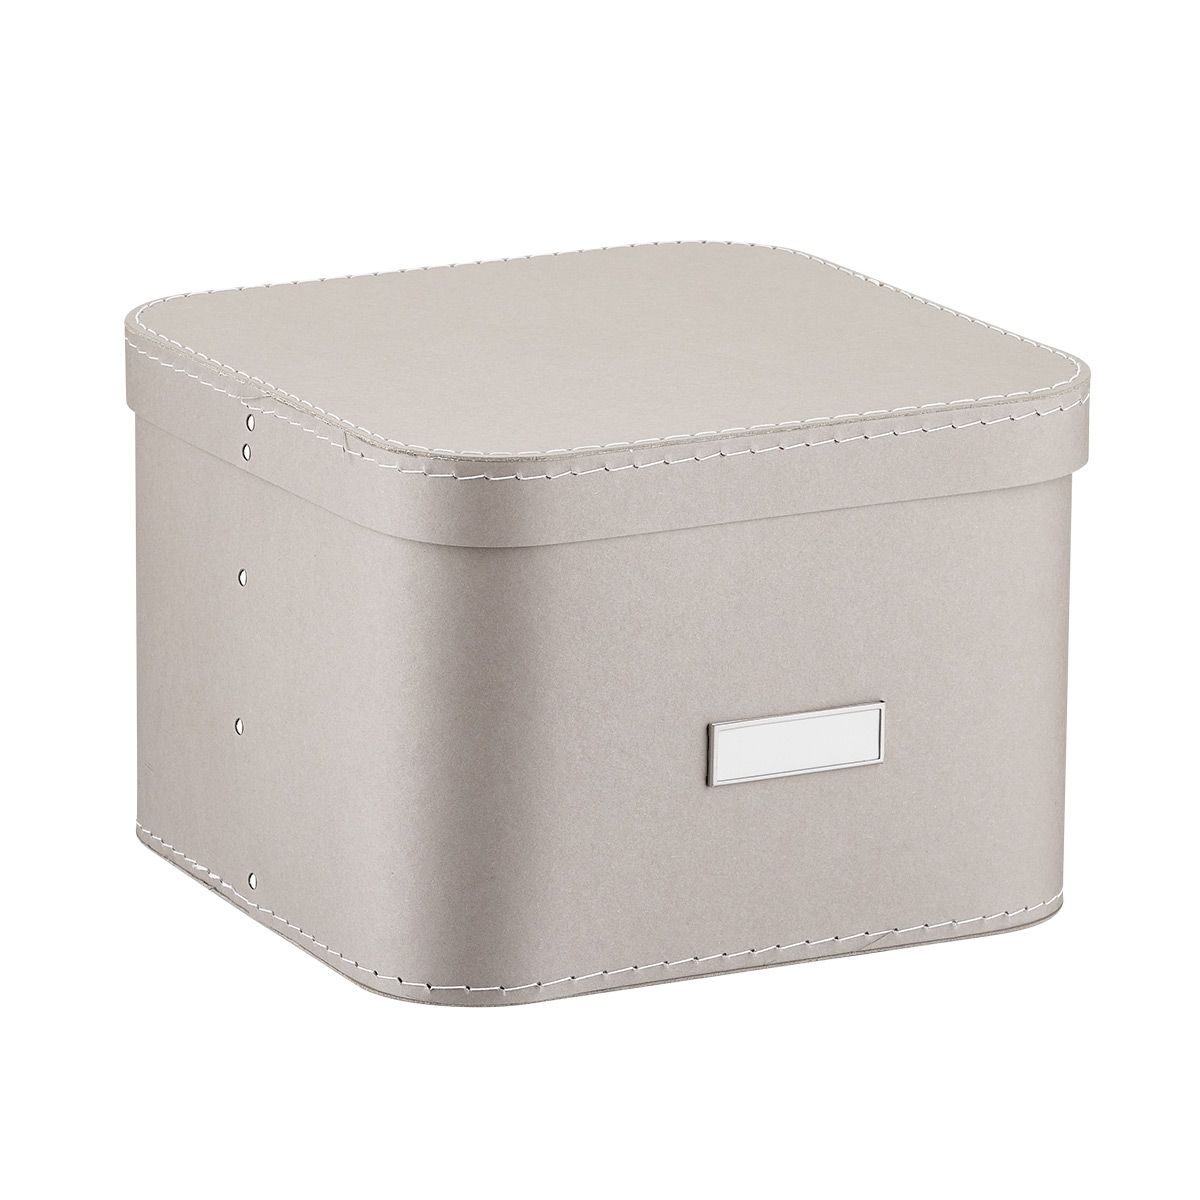 Bigso Oskar Storage Box with Lid | The Container Store